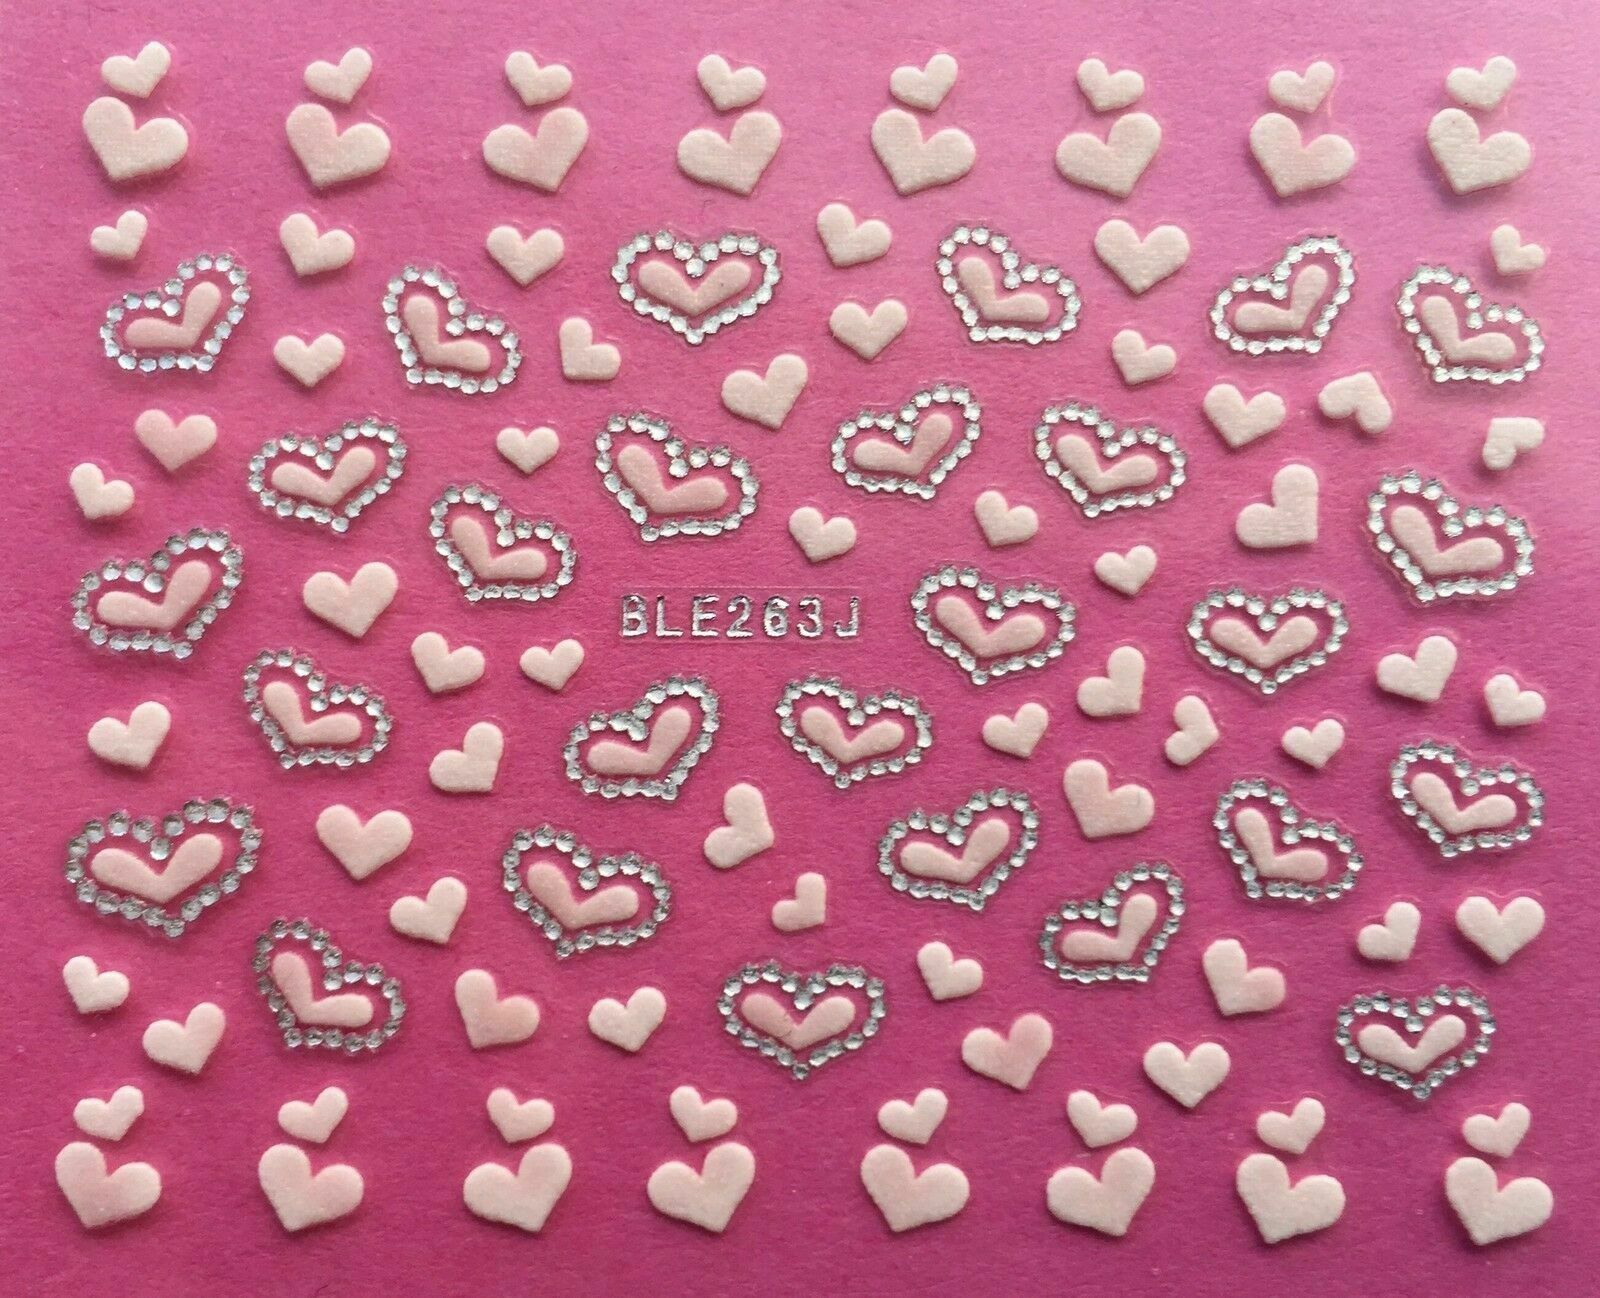 Nail Art 3D Decal Stickers White Hearts Silver Accents BLE263J